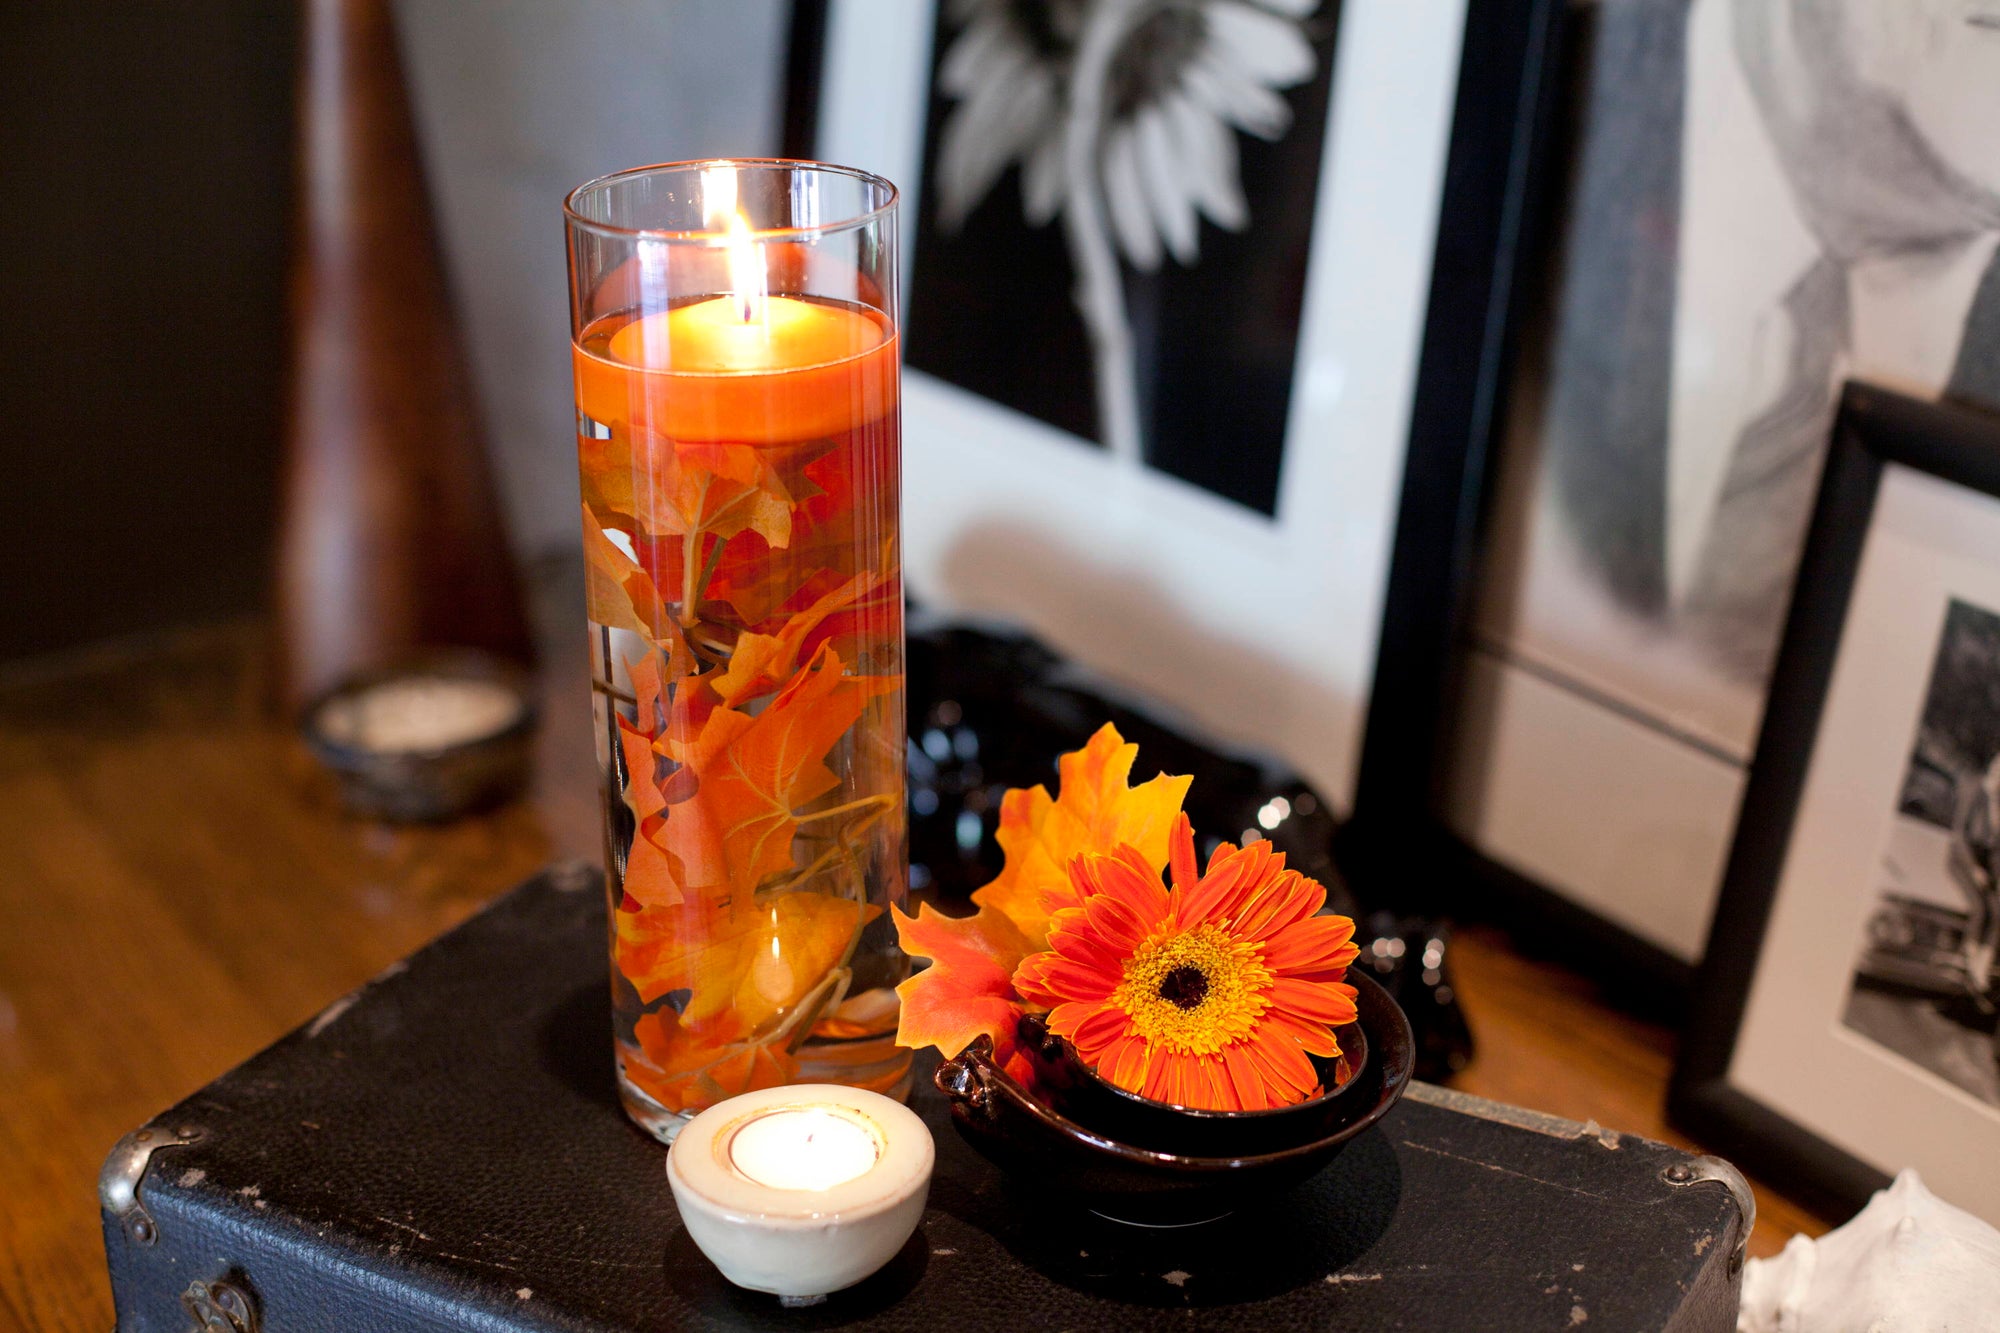 How to Use Orange Floating Candles to Liven Up Your Table!